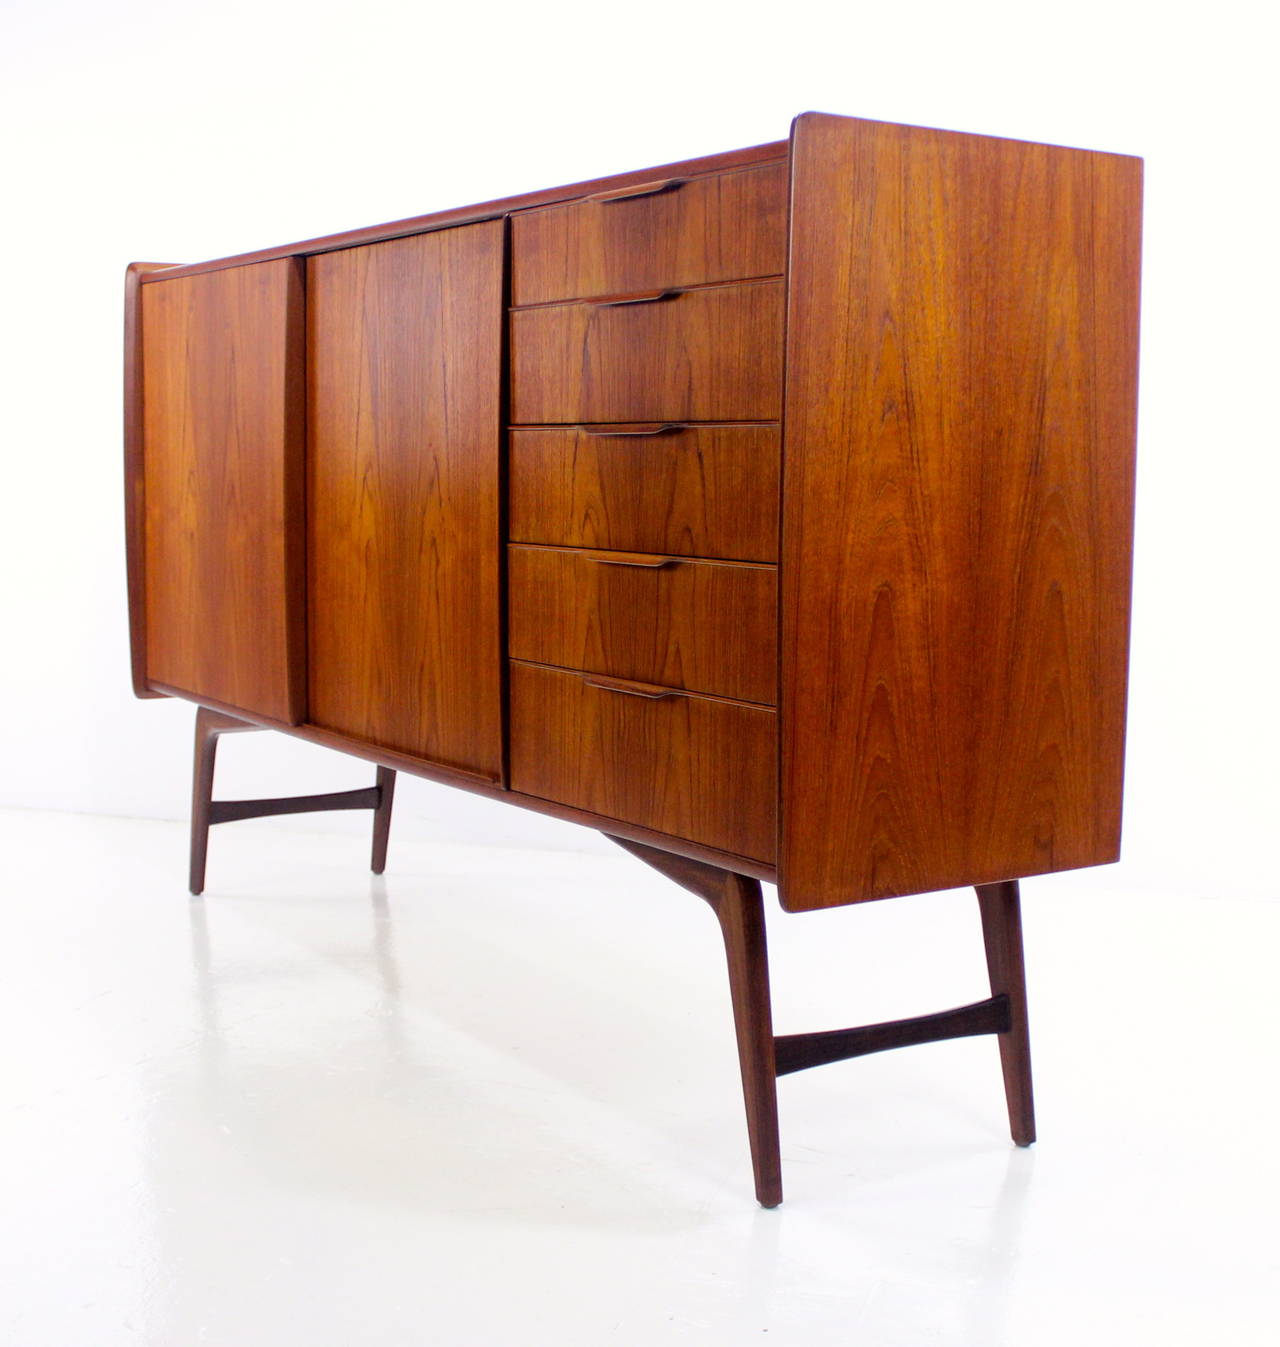 Early Danish Modern Teak Credenza Designed by Harry Ostergaard In Excellent Condition For Sale In Portland, OR